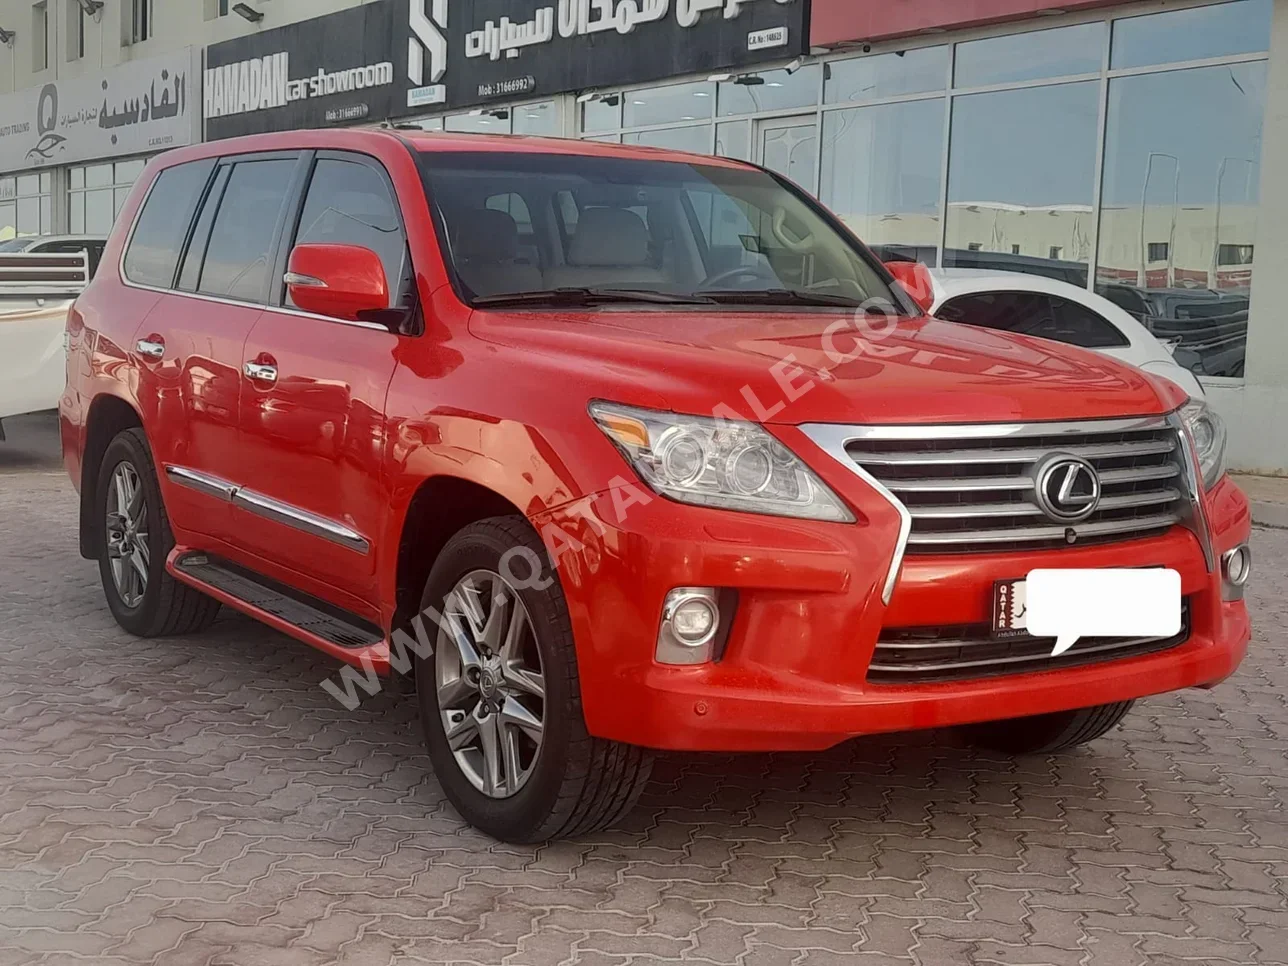 Lexus  LX  570  2014  Automatic  80,000 Km  8 Cylinder  Four Wheel Drive (4WD)  SUV  Red